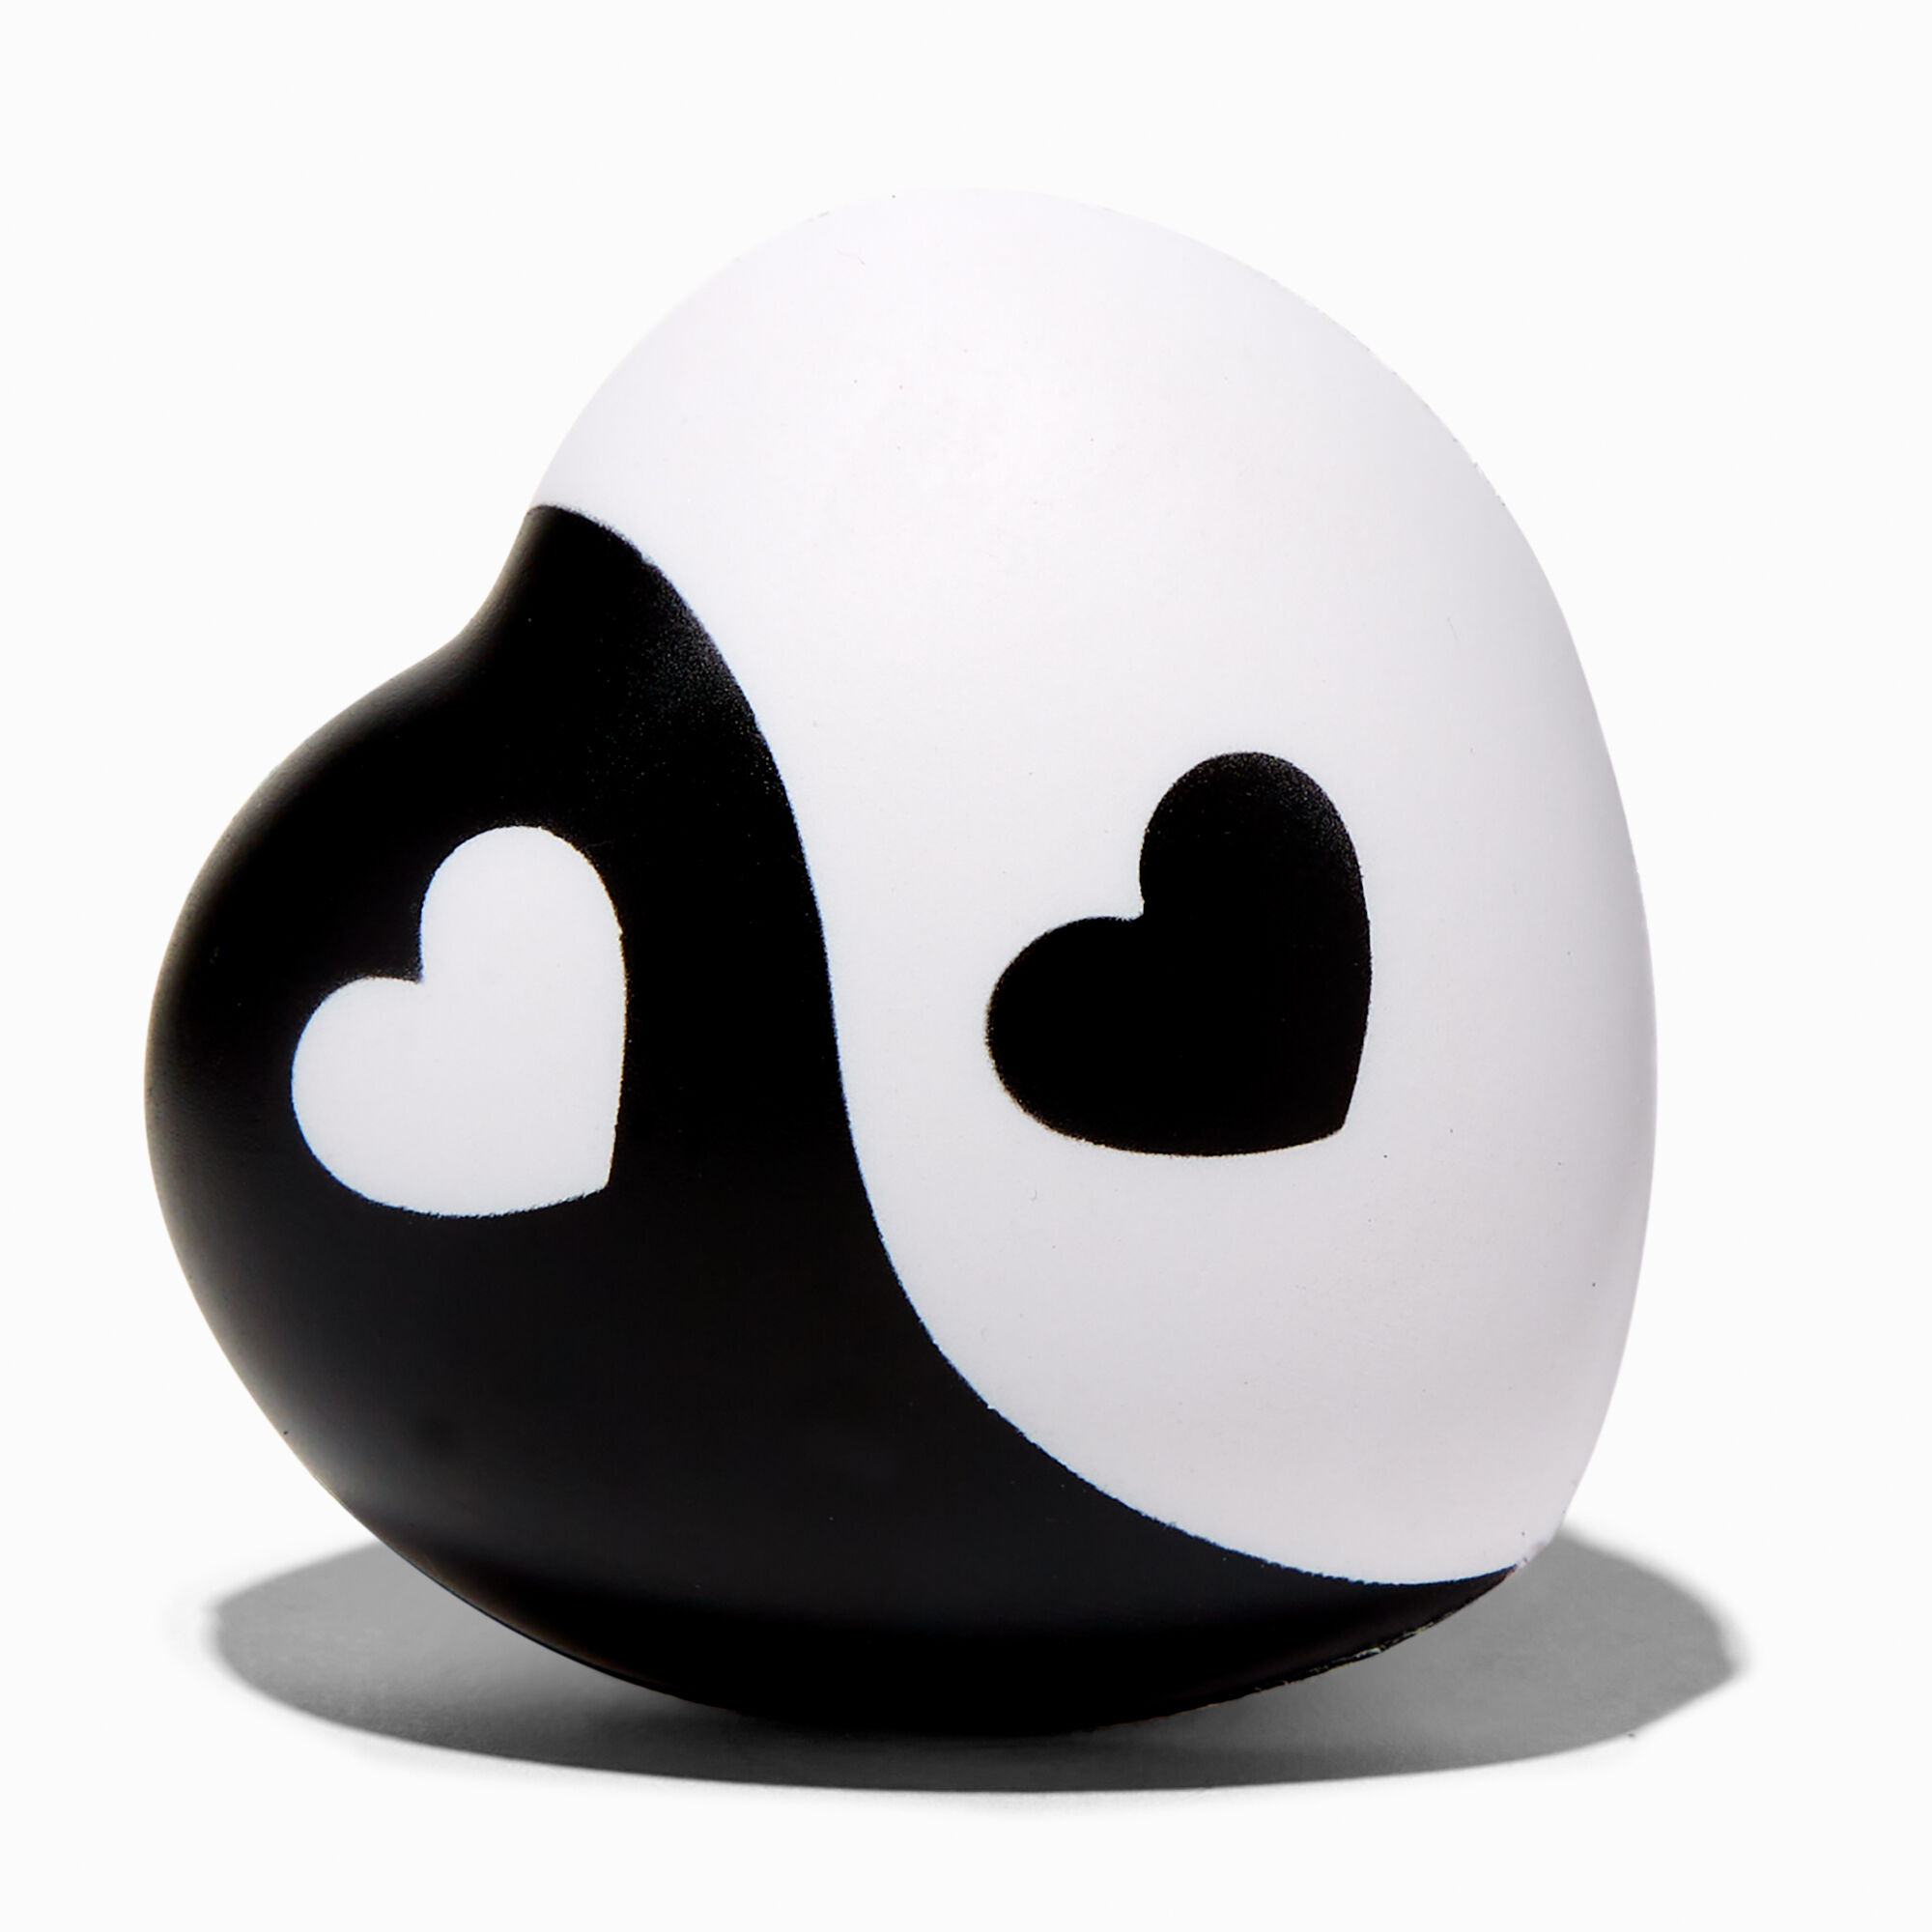 View Claires Yin Yang Heart Stress Ball information